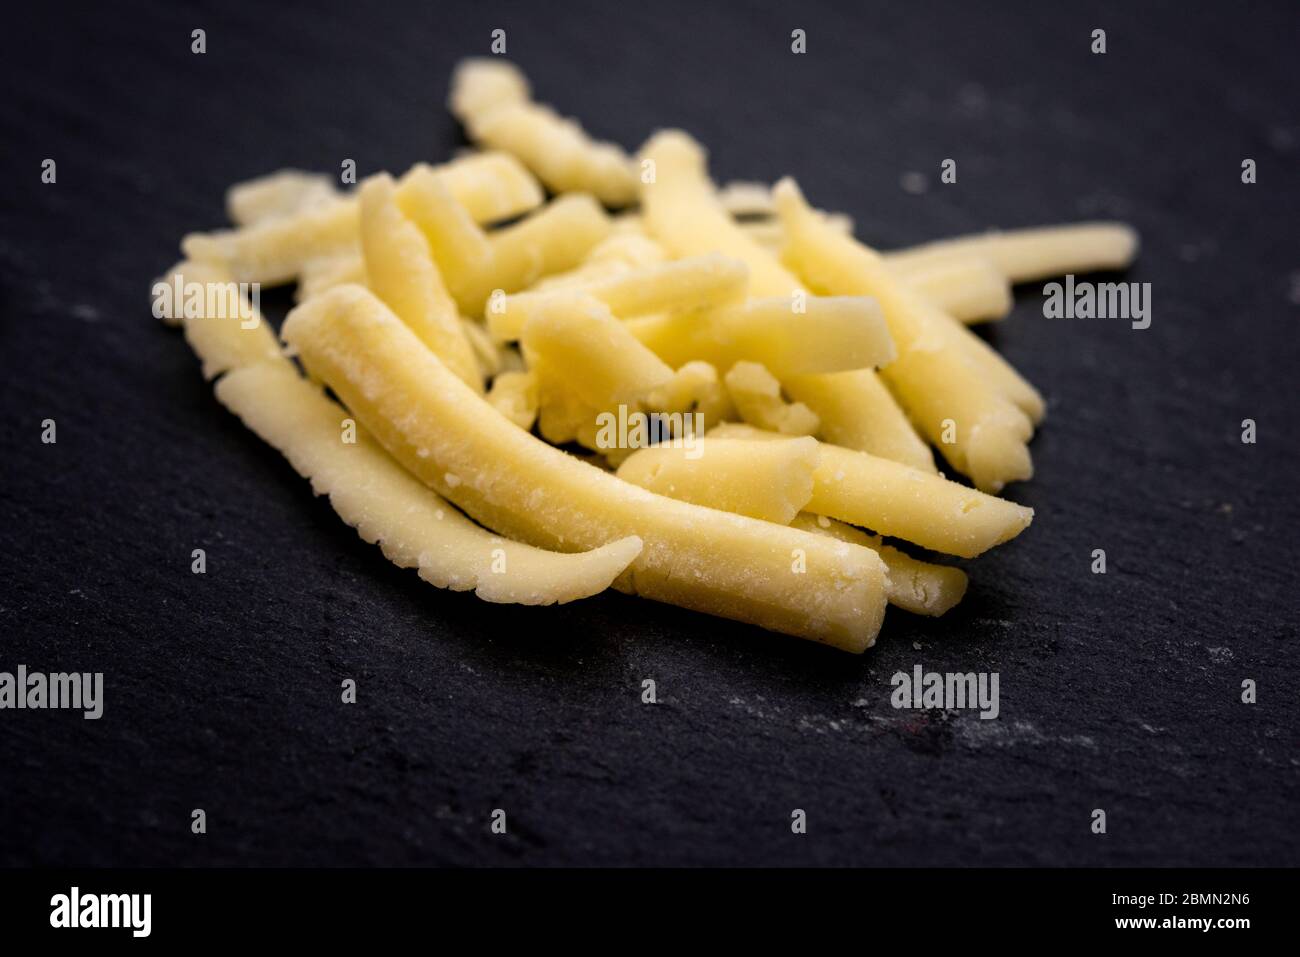 Grated cheese Stock Photo